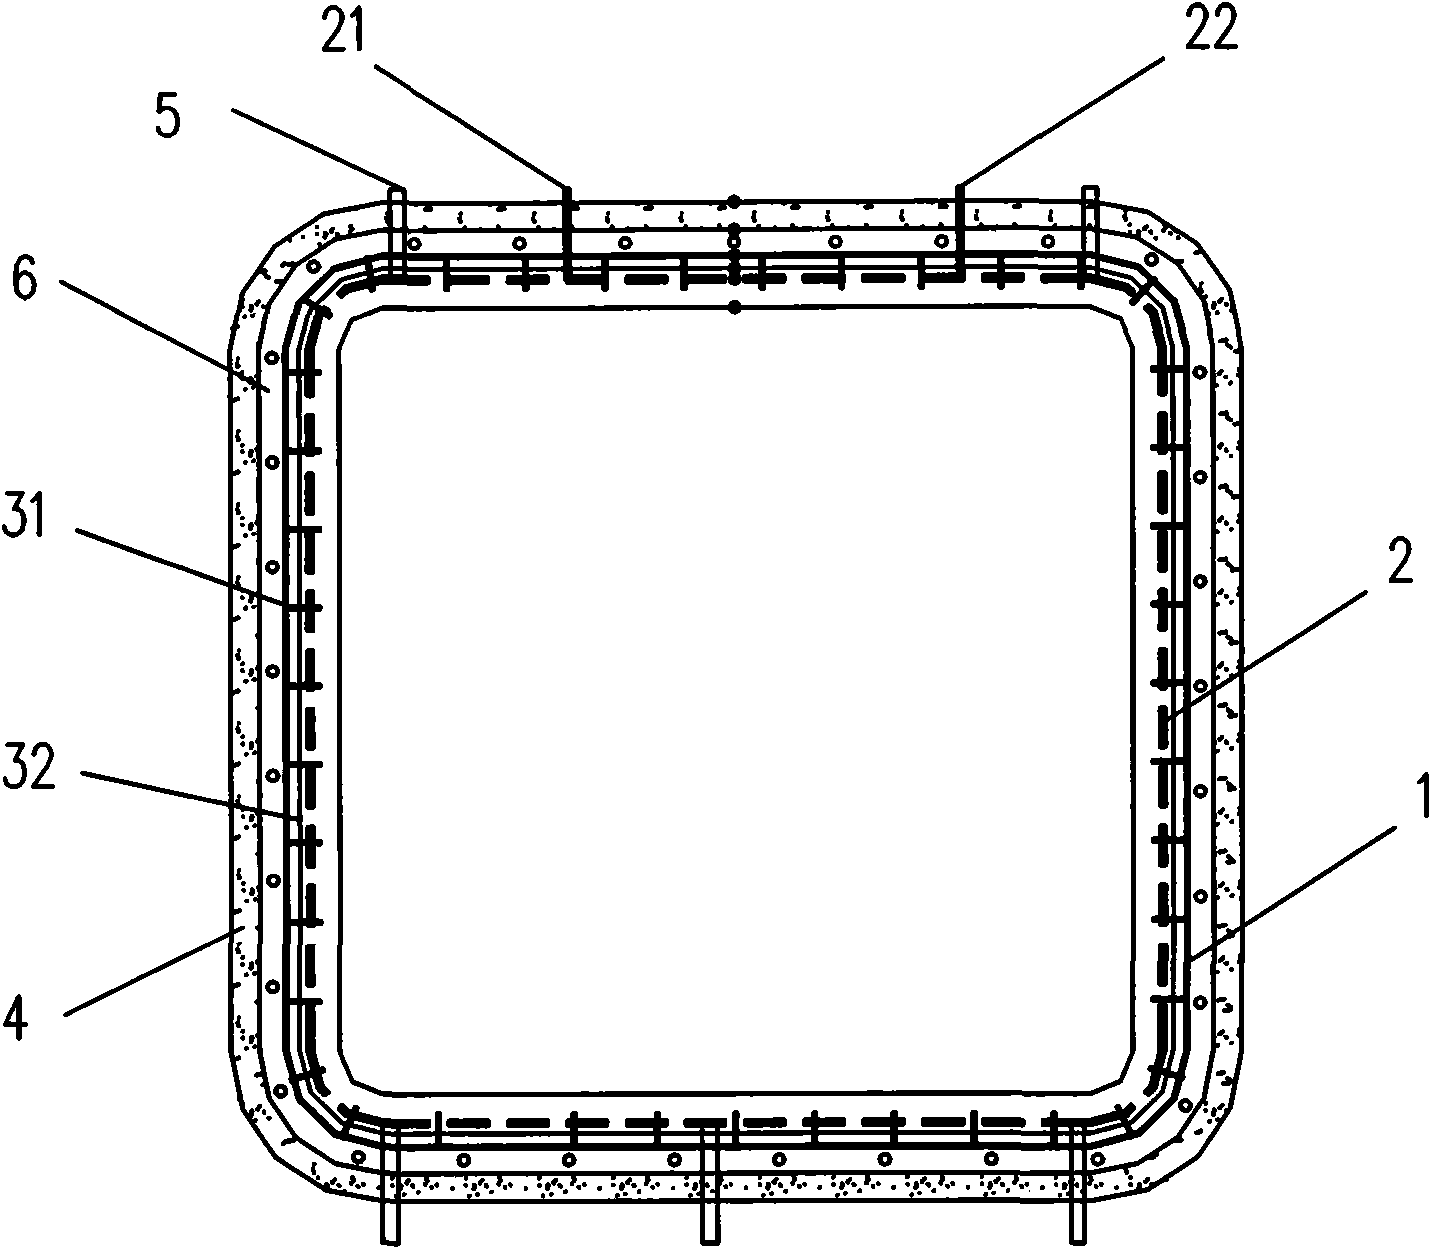 Water stopping device for tunneling machine going in and out of tunnel and water stopping method